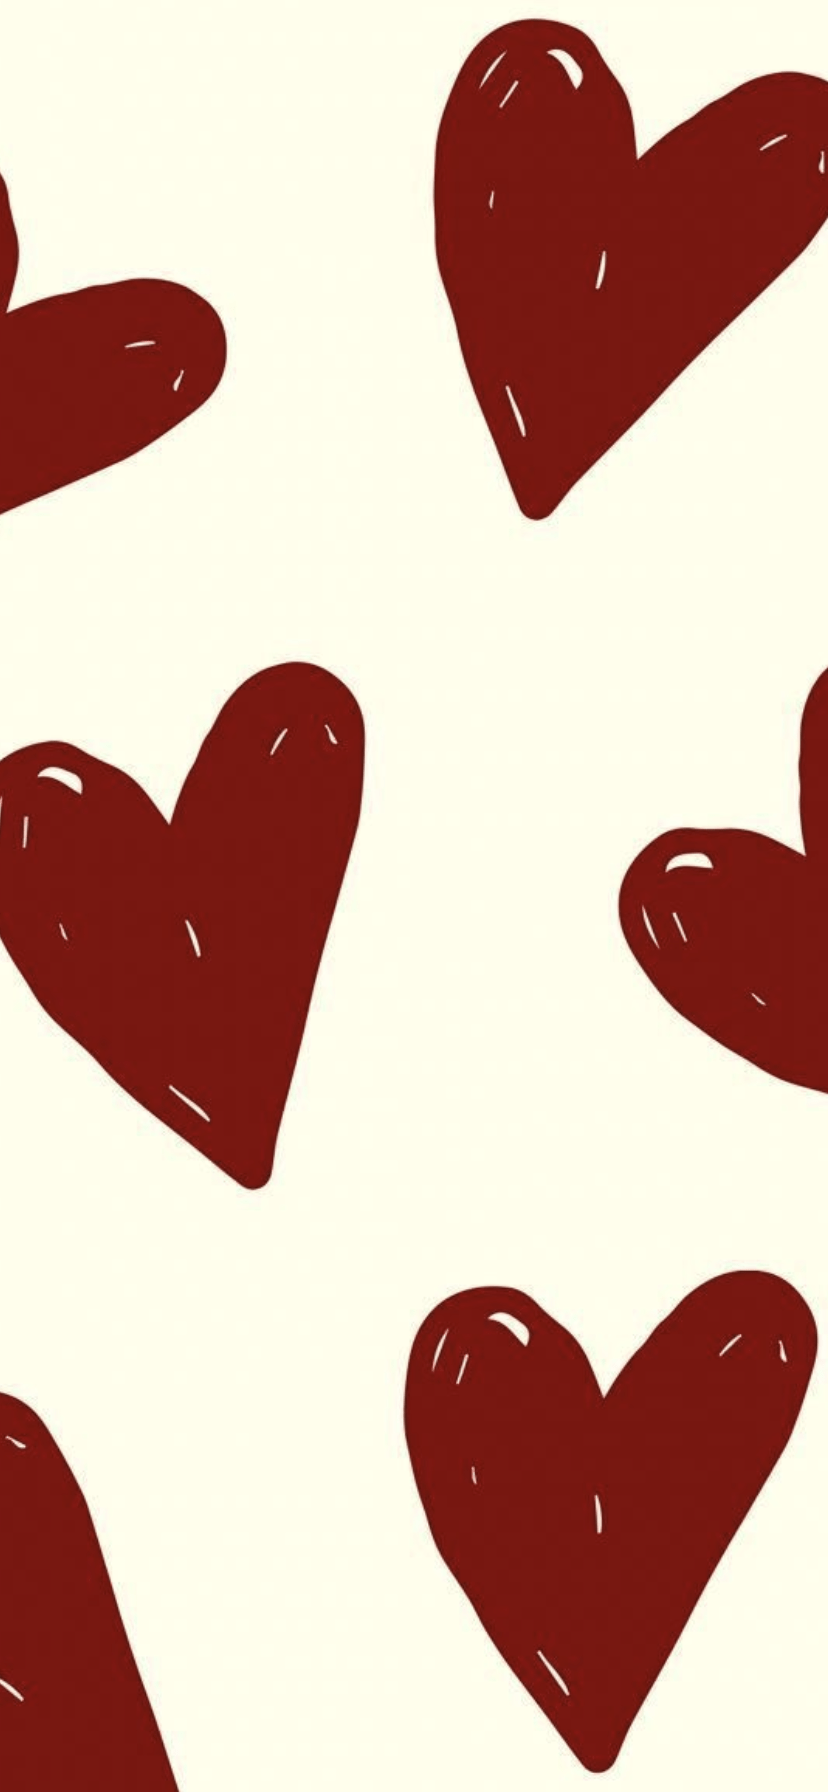 hand drawn red hearts